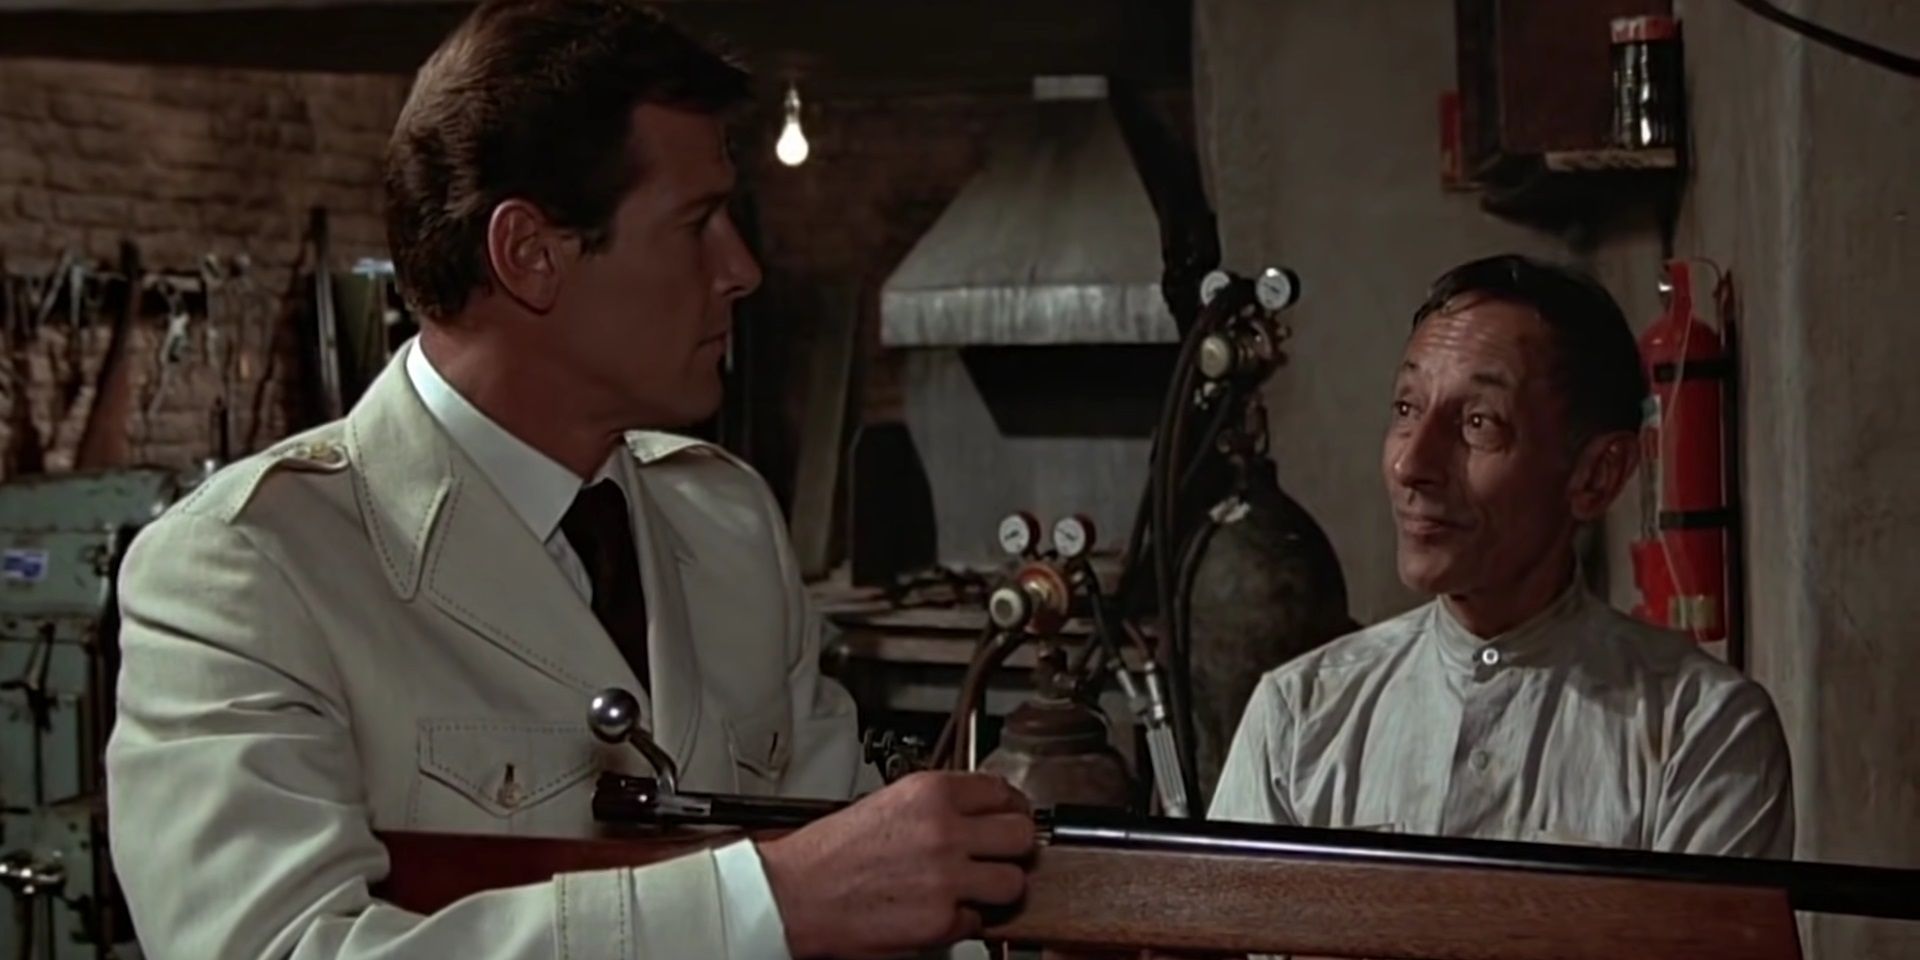 Lazar shows Bond a rifle in The Man with the Golden Gun